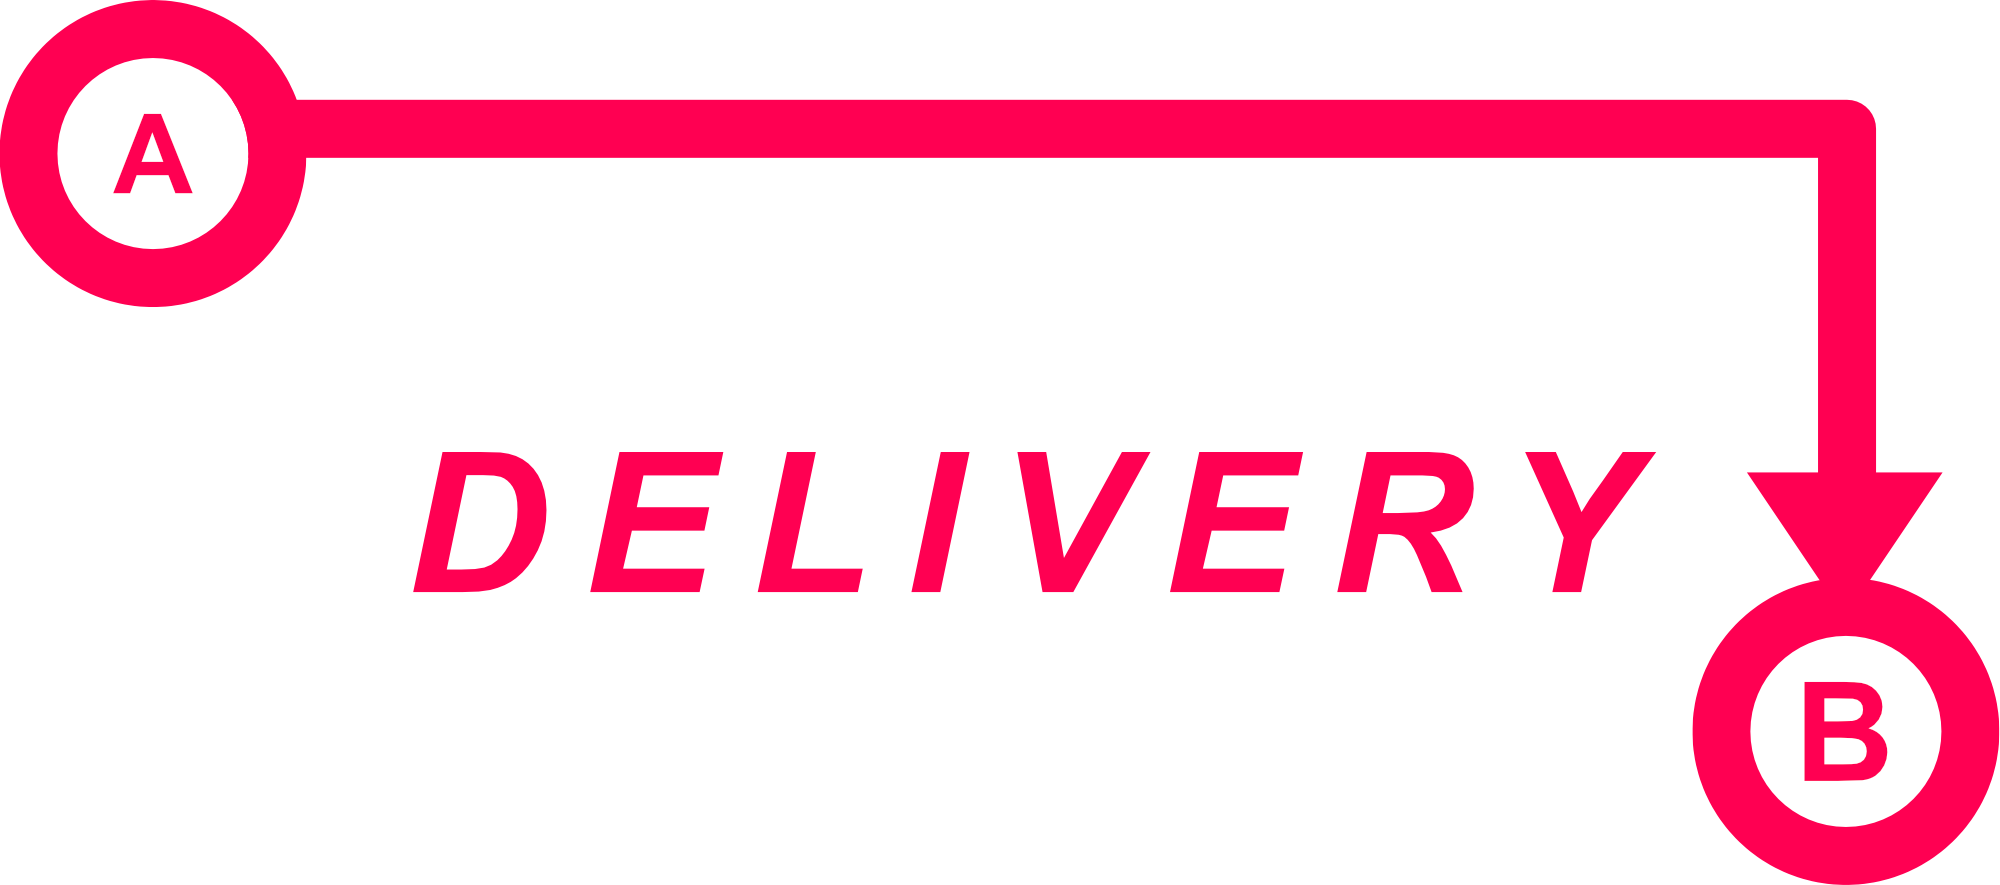 flawless-delivery-logo-white-text.png